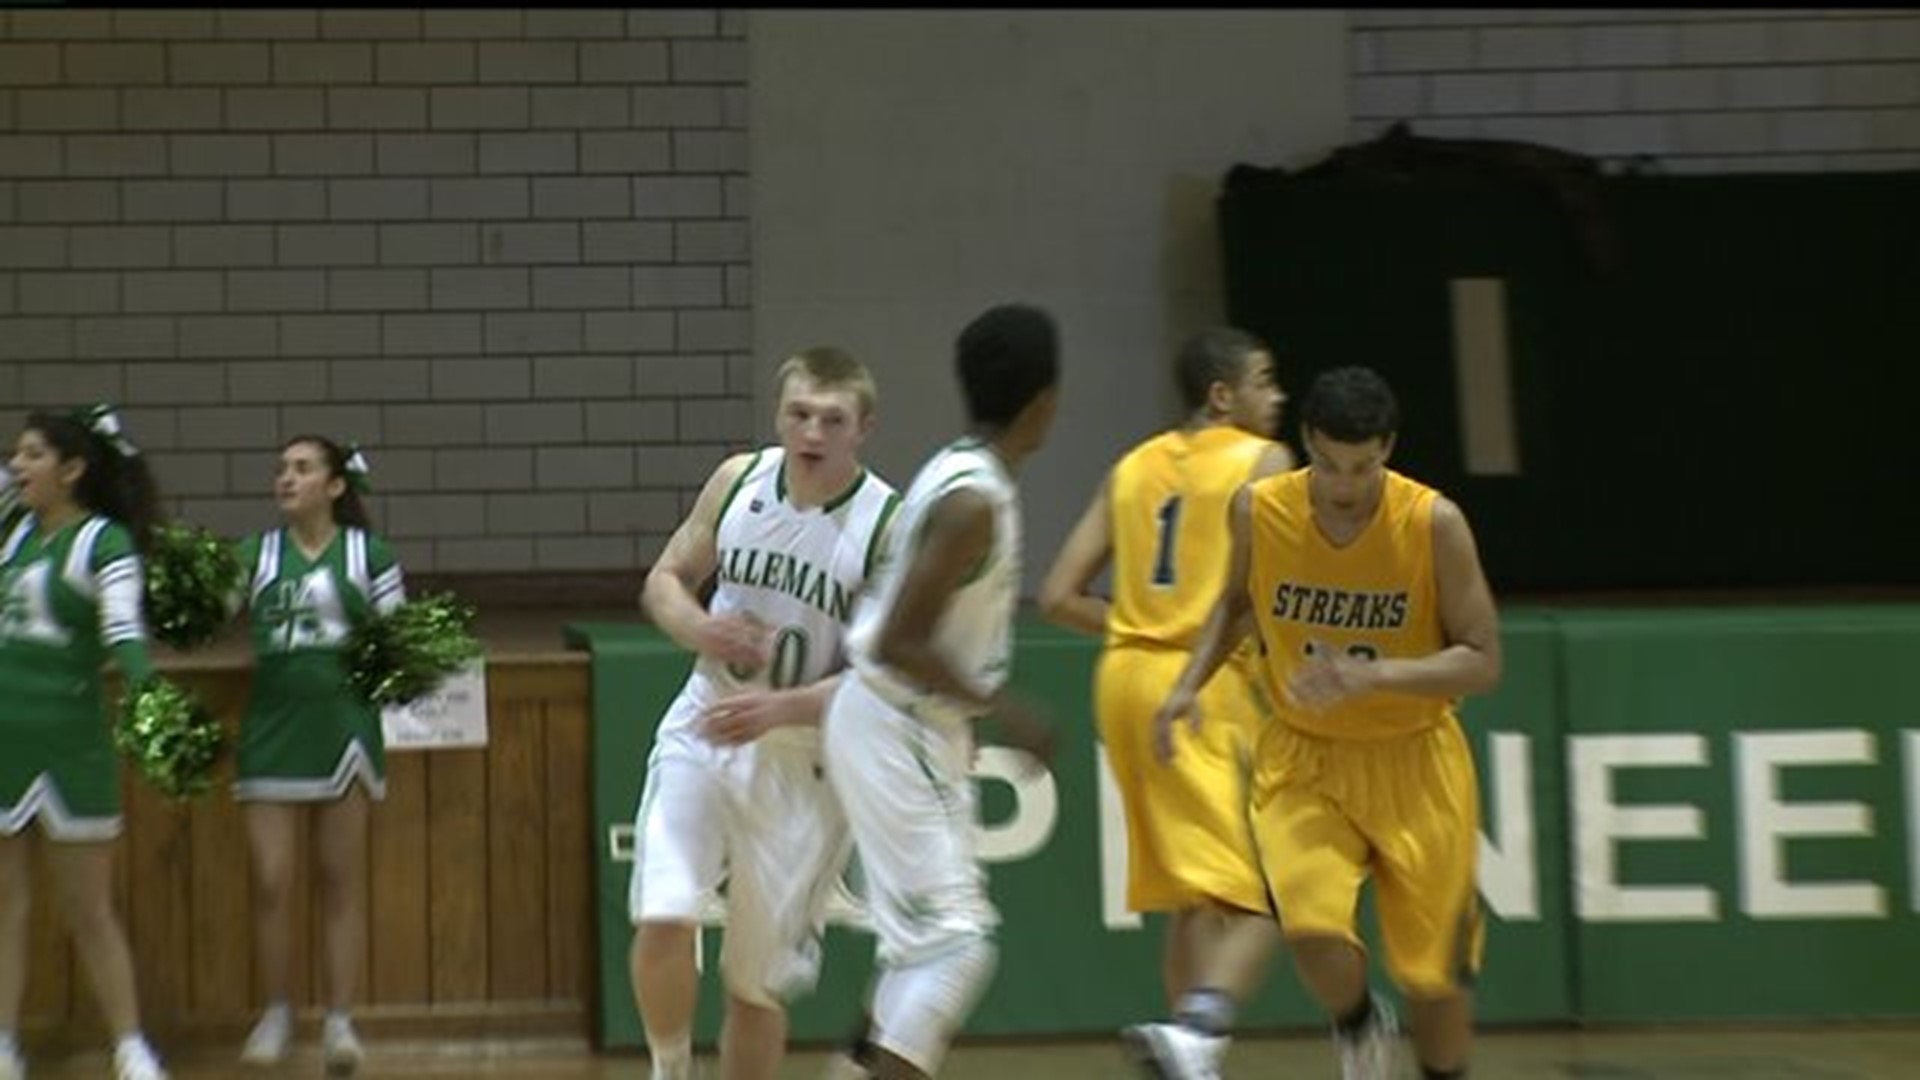 Galesburg wins by 25 over Alleman